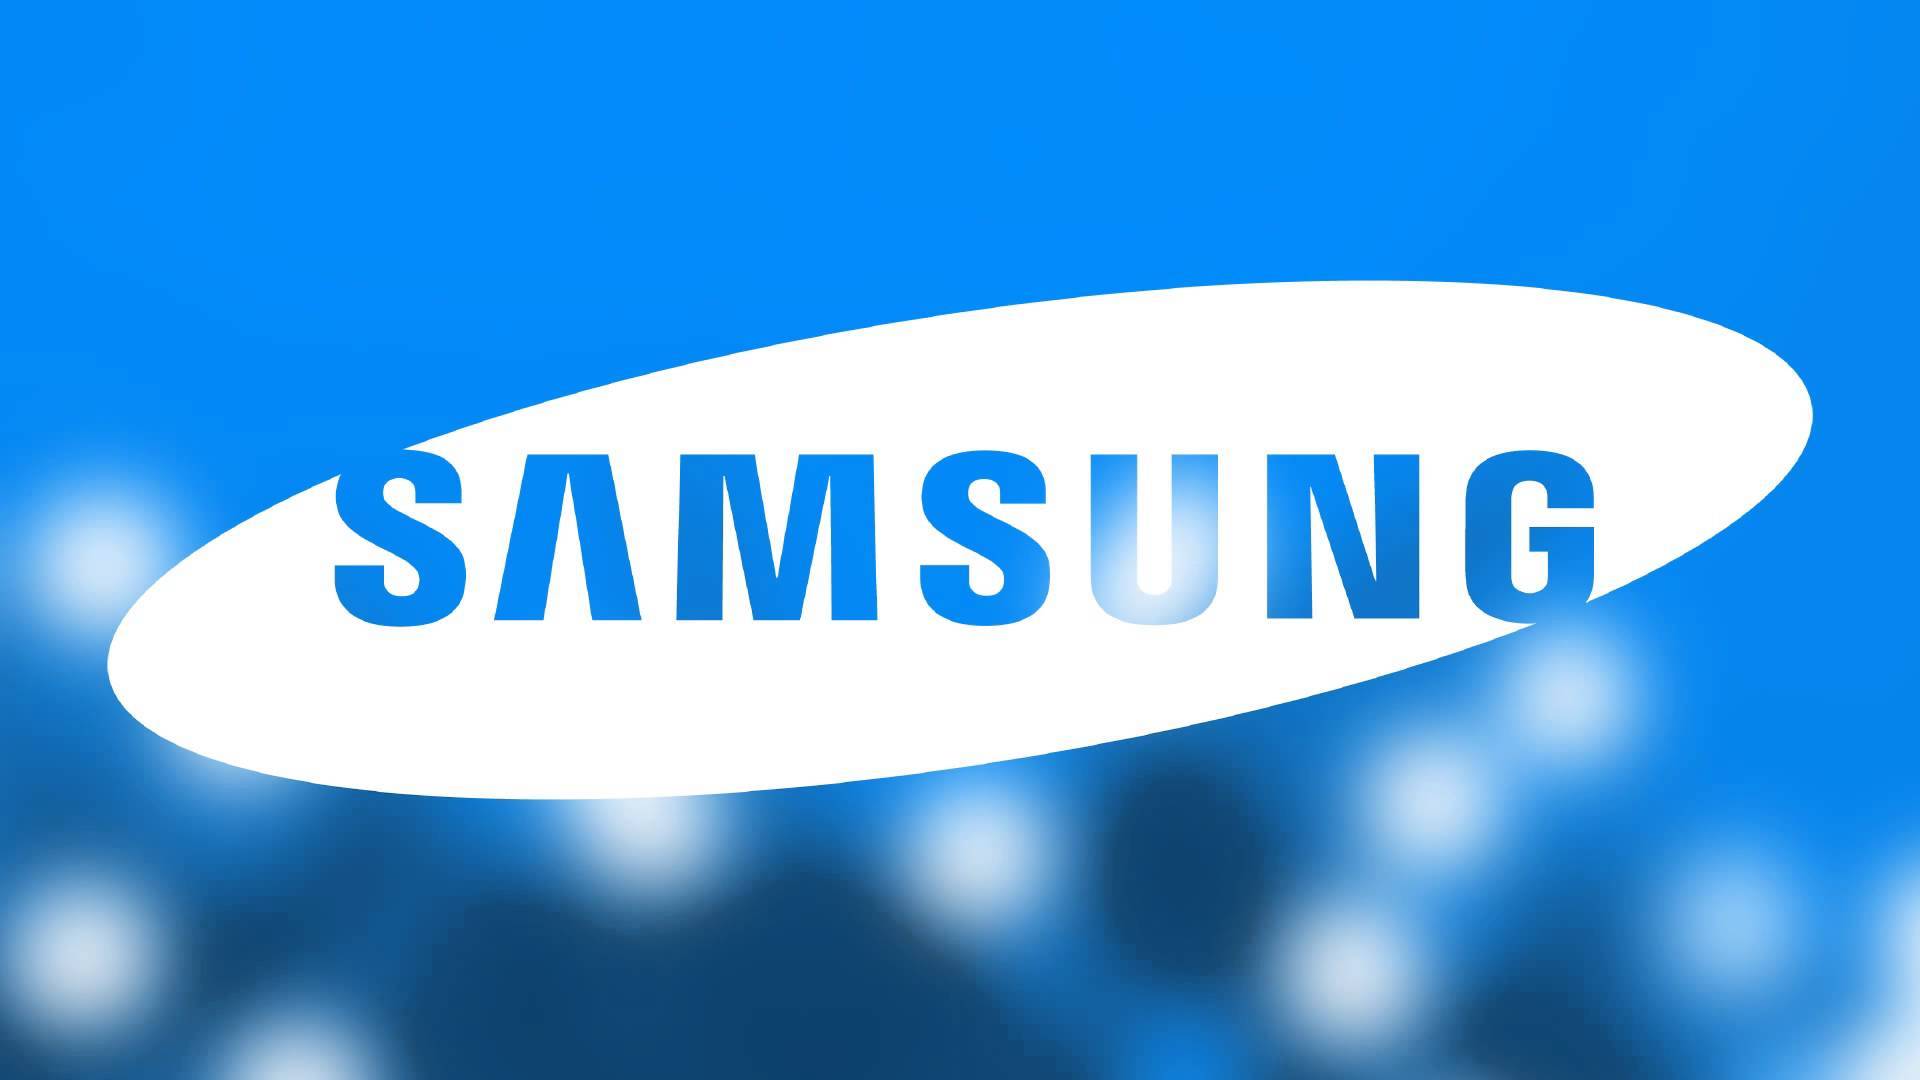 Samsung TV Logo - Samsung to Offer TV Advertising Insights To 3rd Parties Via ACR